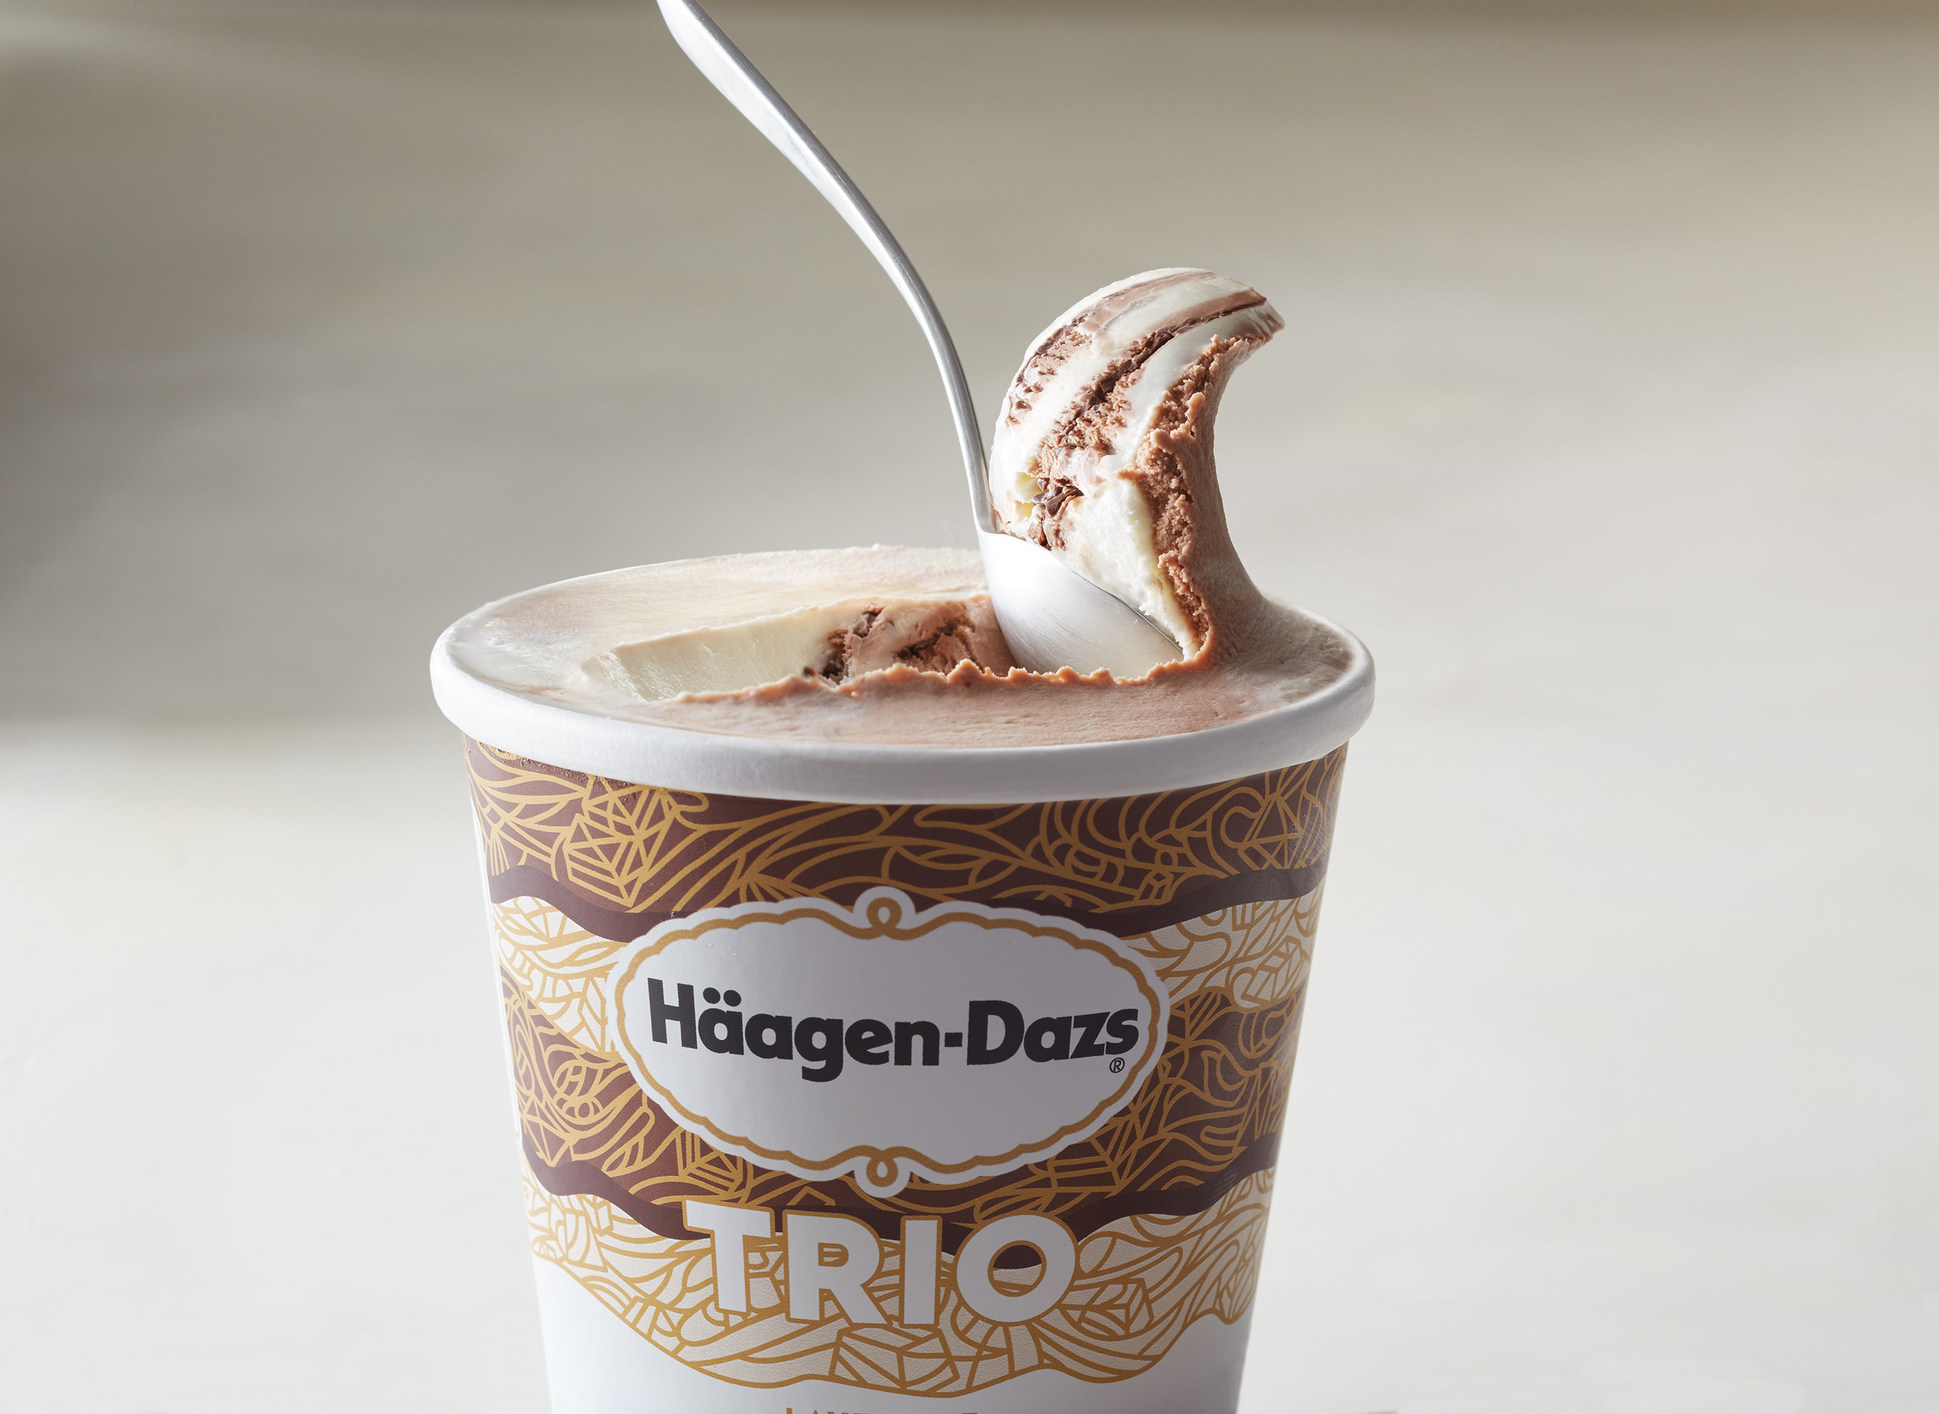 Combinations New in of Layers Unveils Collection Decadent Layers and Brand Häagen-Dazs® The TRIO